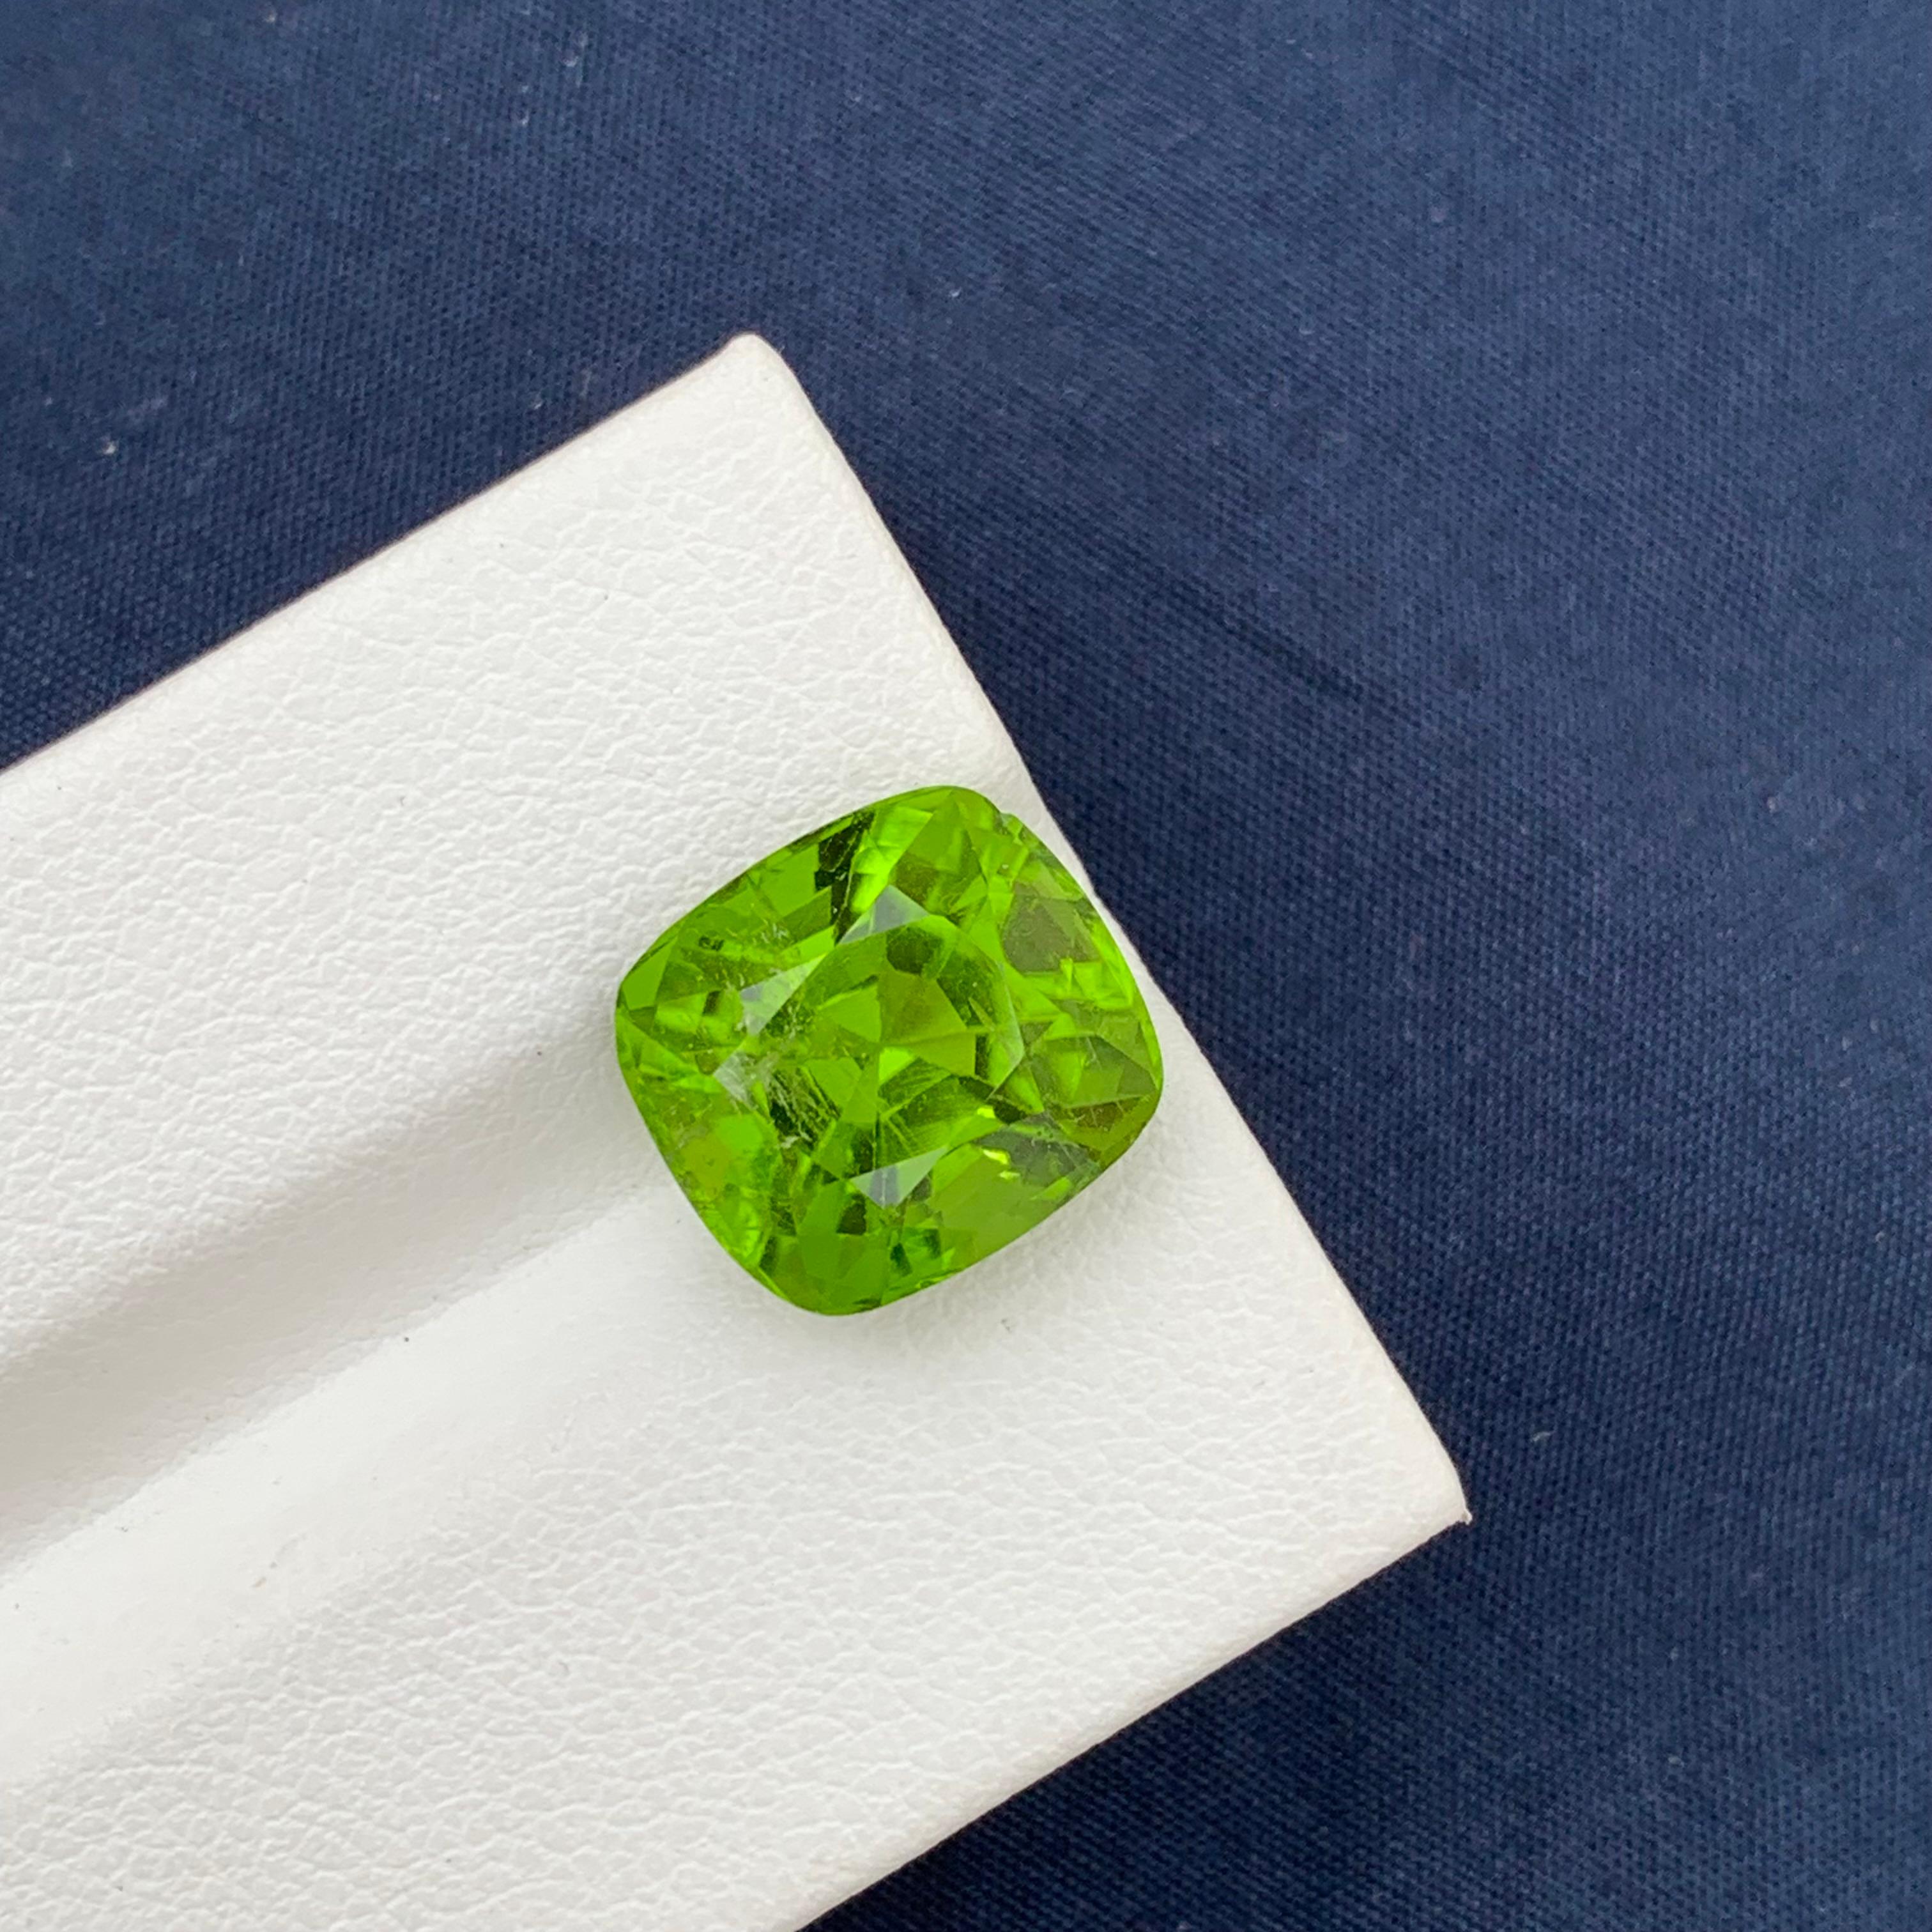 Loose Peridot
Weight: 8.70 Carats
Dimension: 11.8 x 10.9 x 8.8 Mm
Colour: Green
Origin: Supat Valley, Pakistan
Shape: Cushion
Certificate: On Demand
Treatment: Non

Peridot, a vibrant and lustrous gemstone, has been cherished for centuries for its